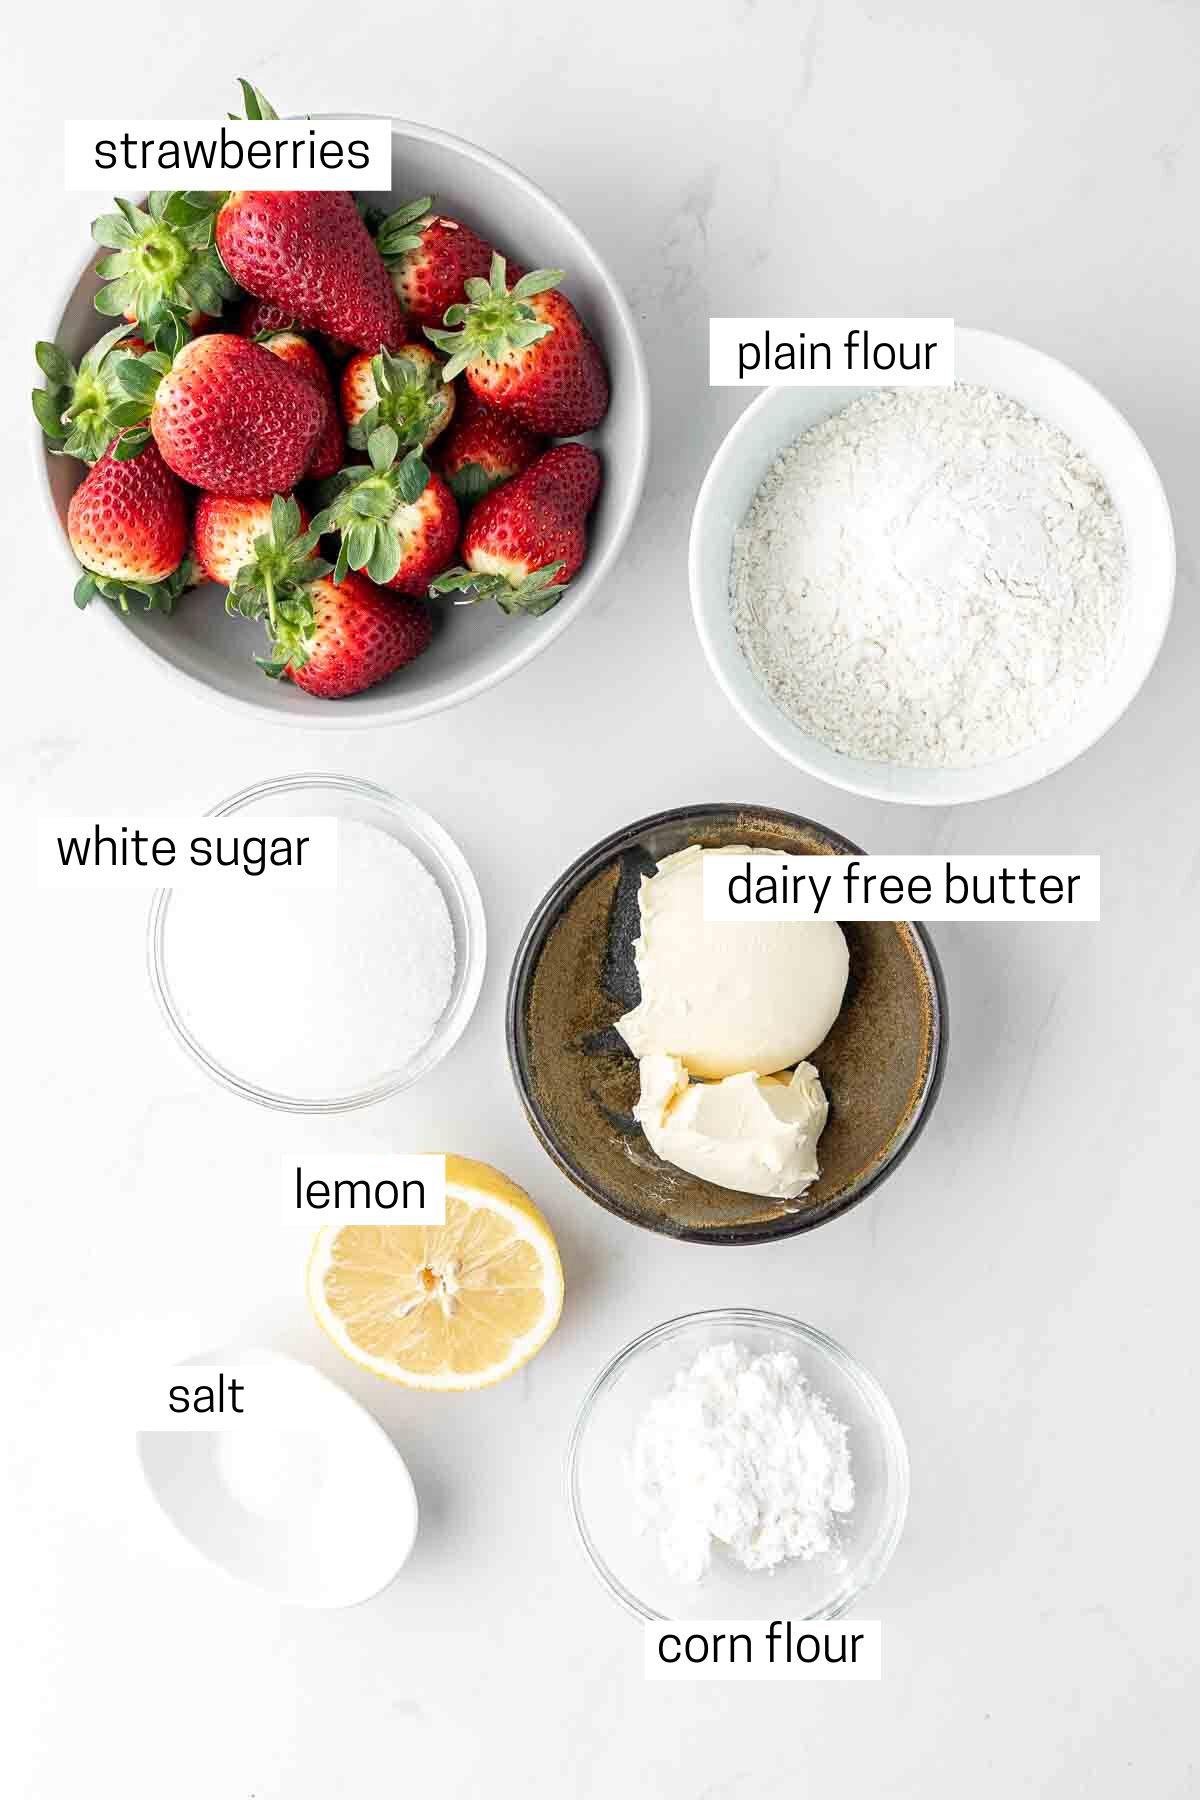 All ingredients for strawberry galette laid out in bowls.